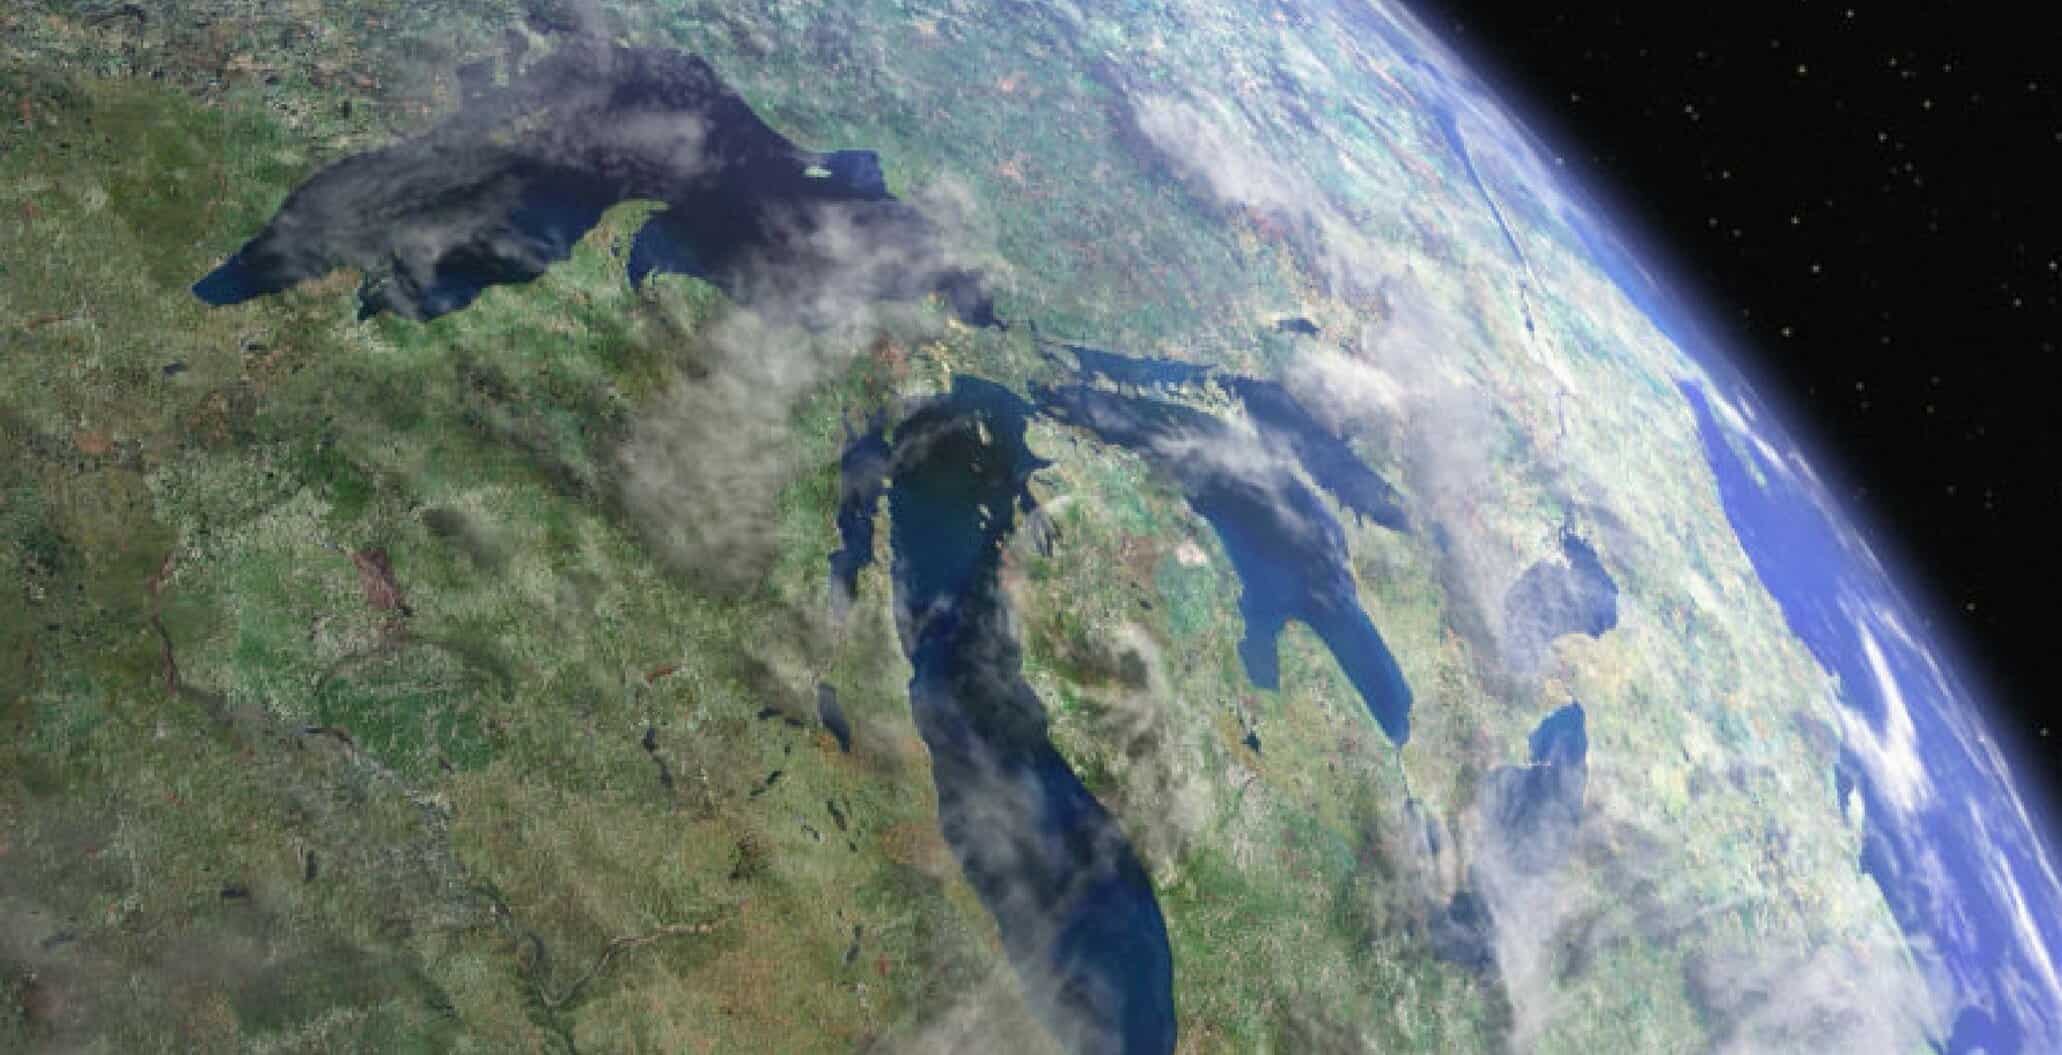 Michigan LCV supports polluter pay legislation to protect Michigan’s air, land and water